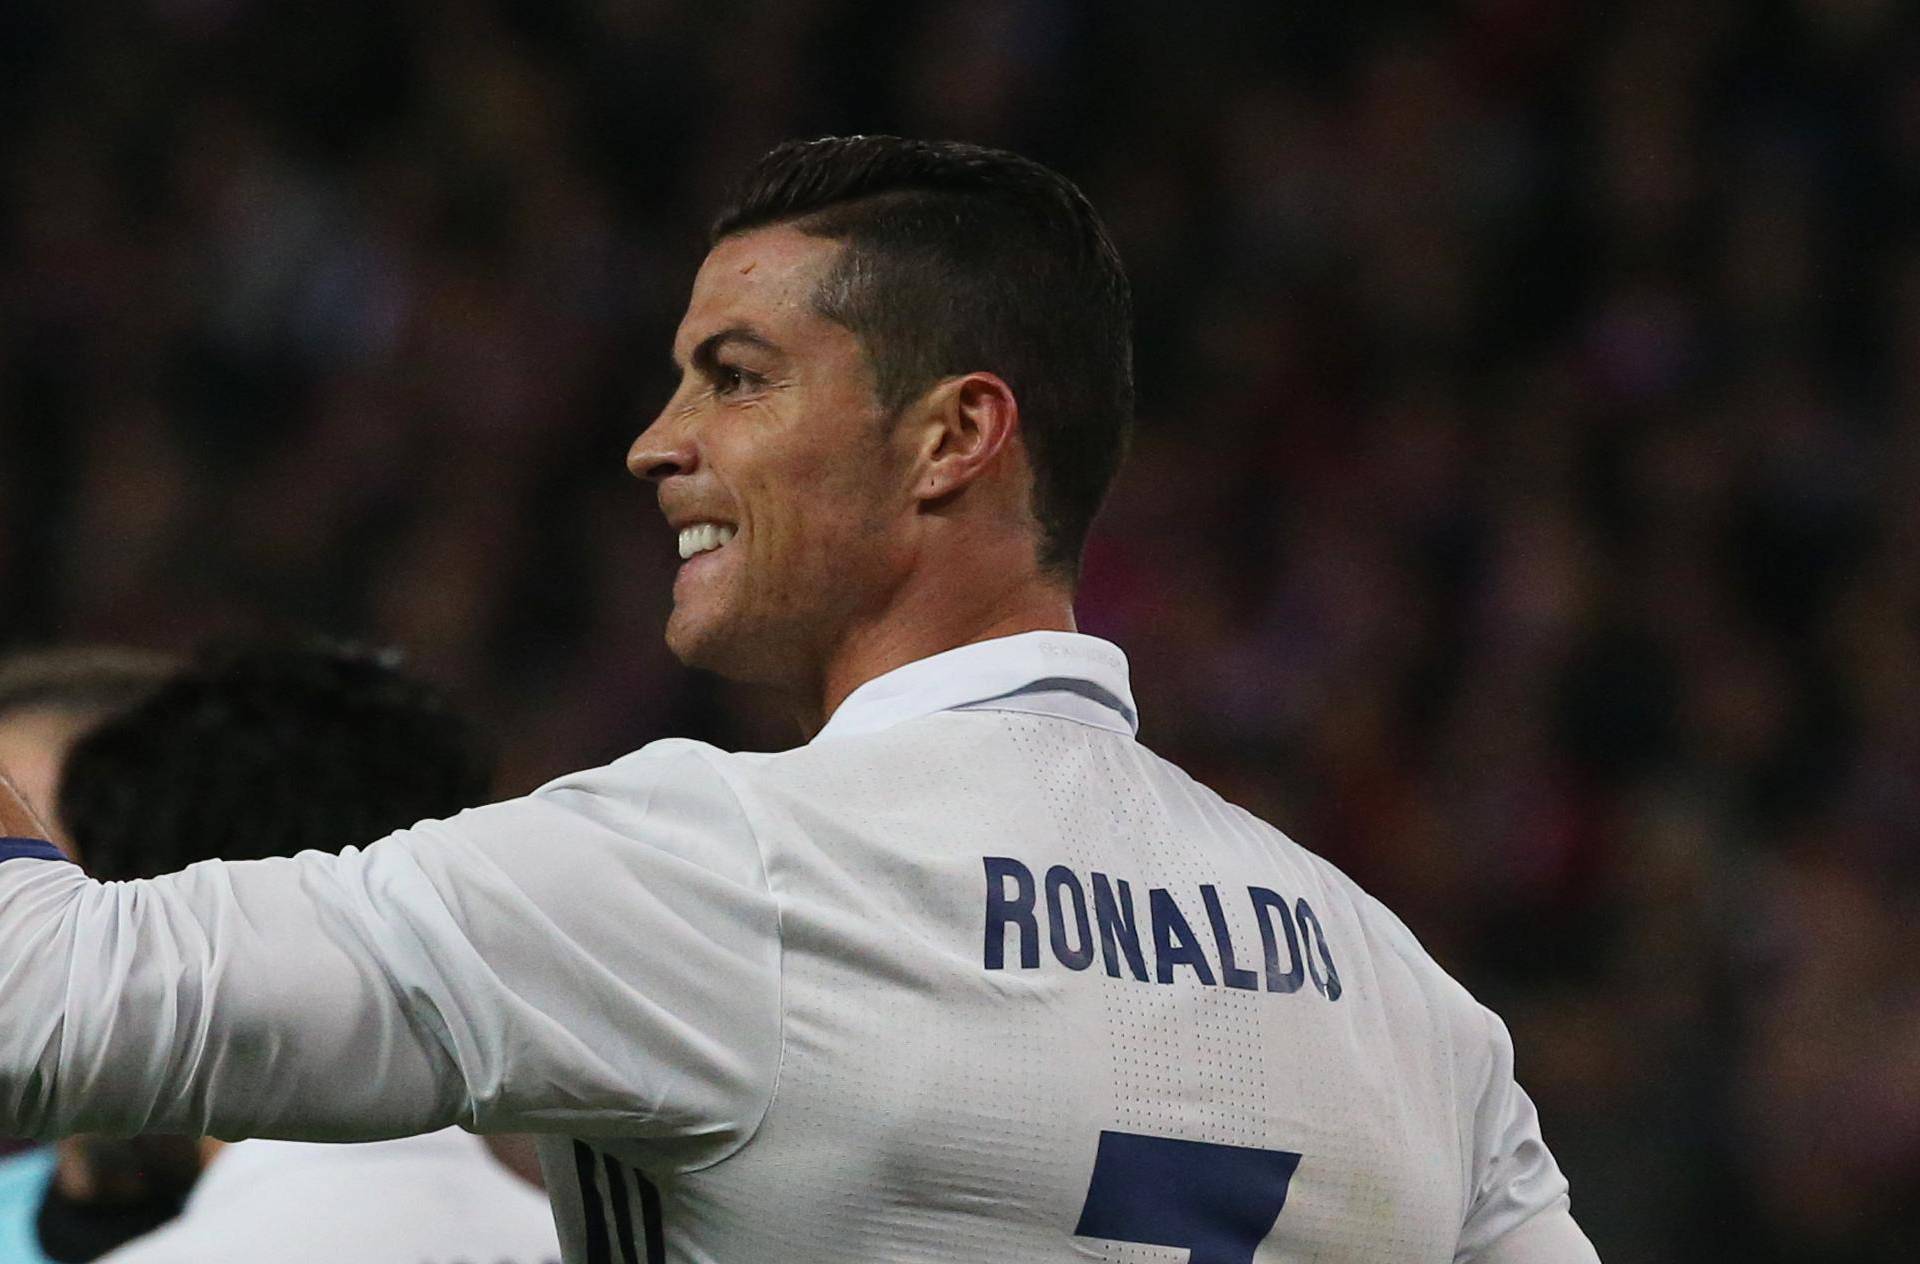 Real Madrid's Cristiano Ronaldo celebrates scoring their third goal to complete his hat trick